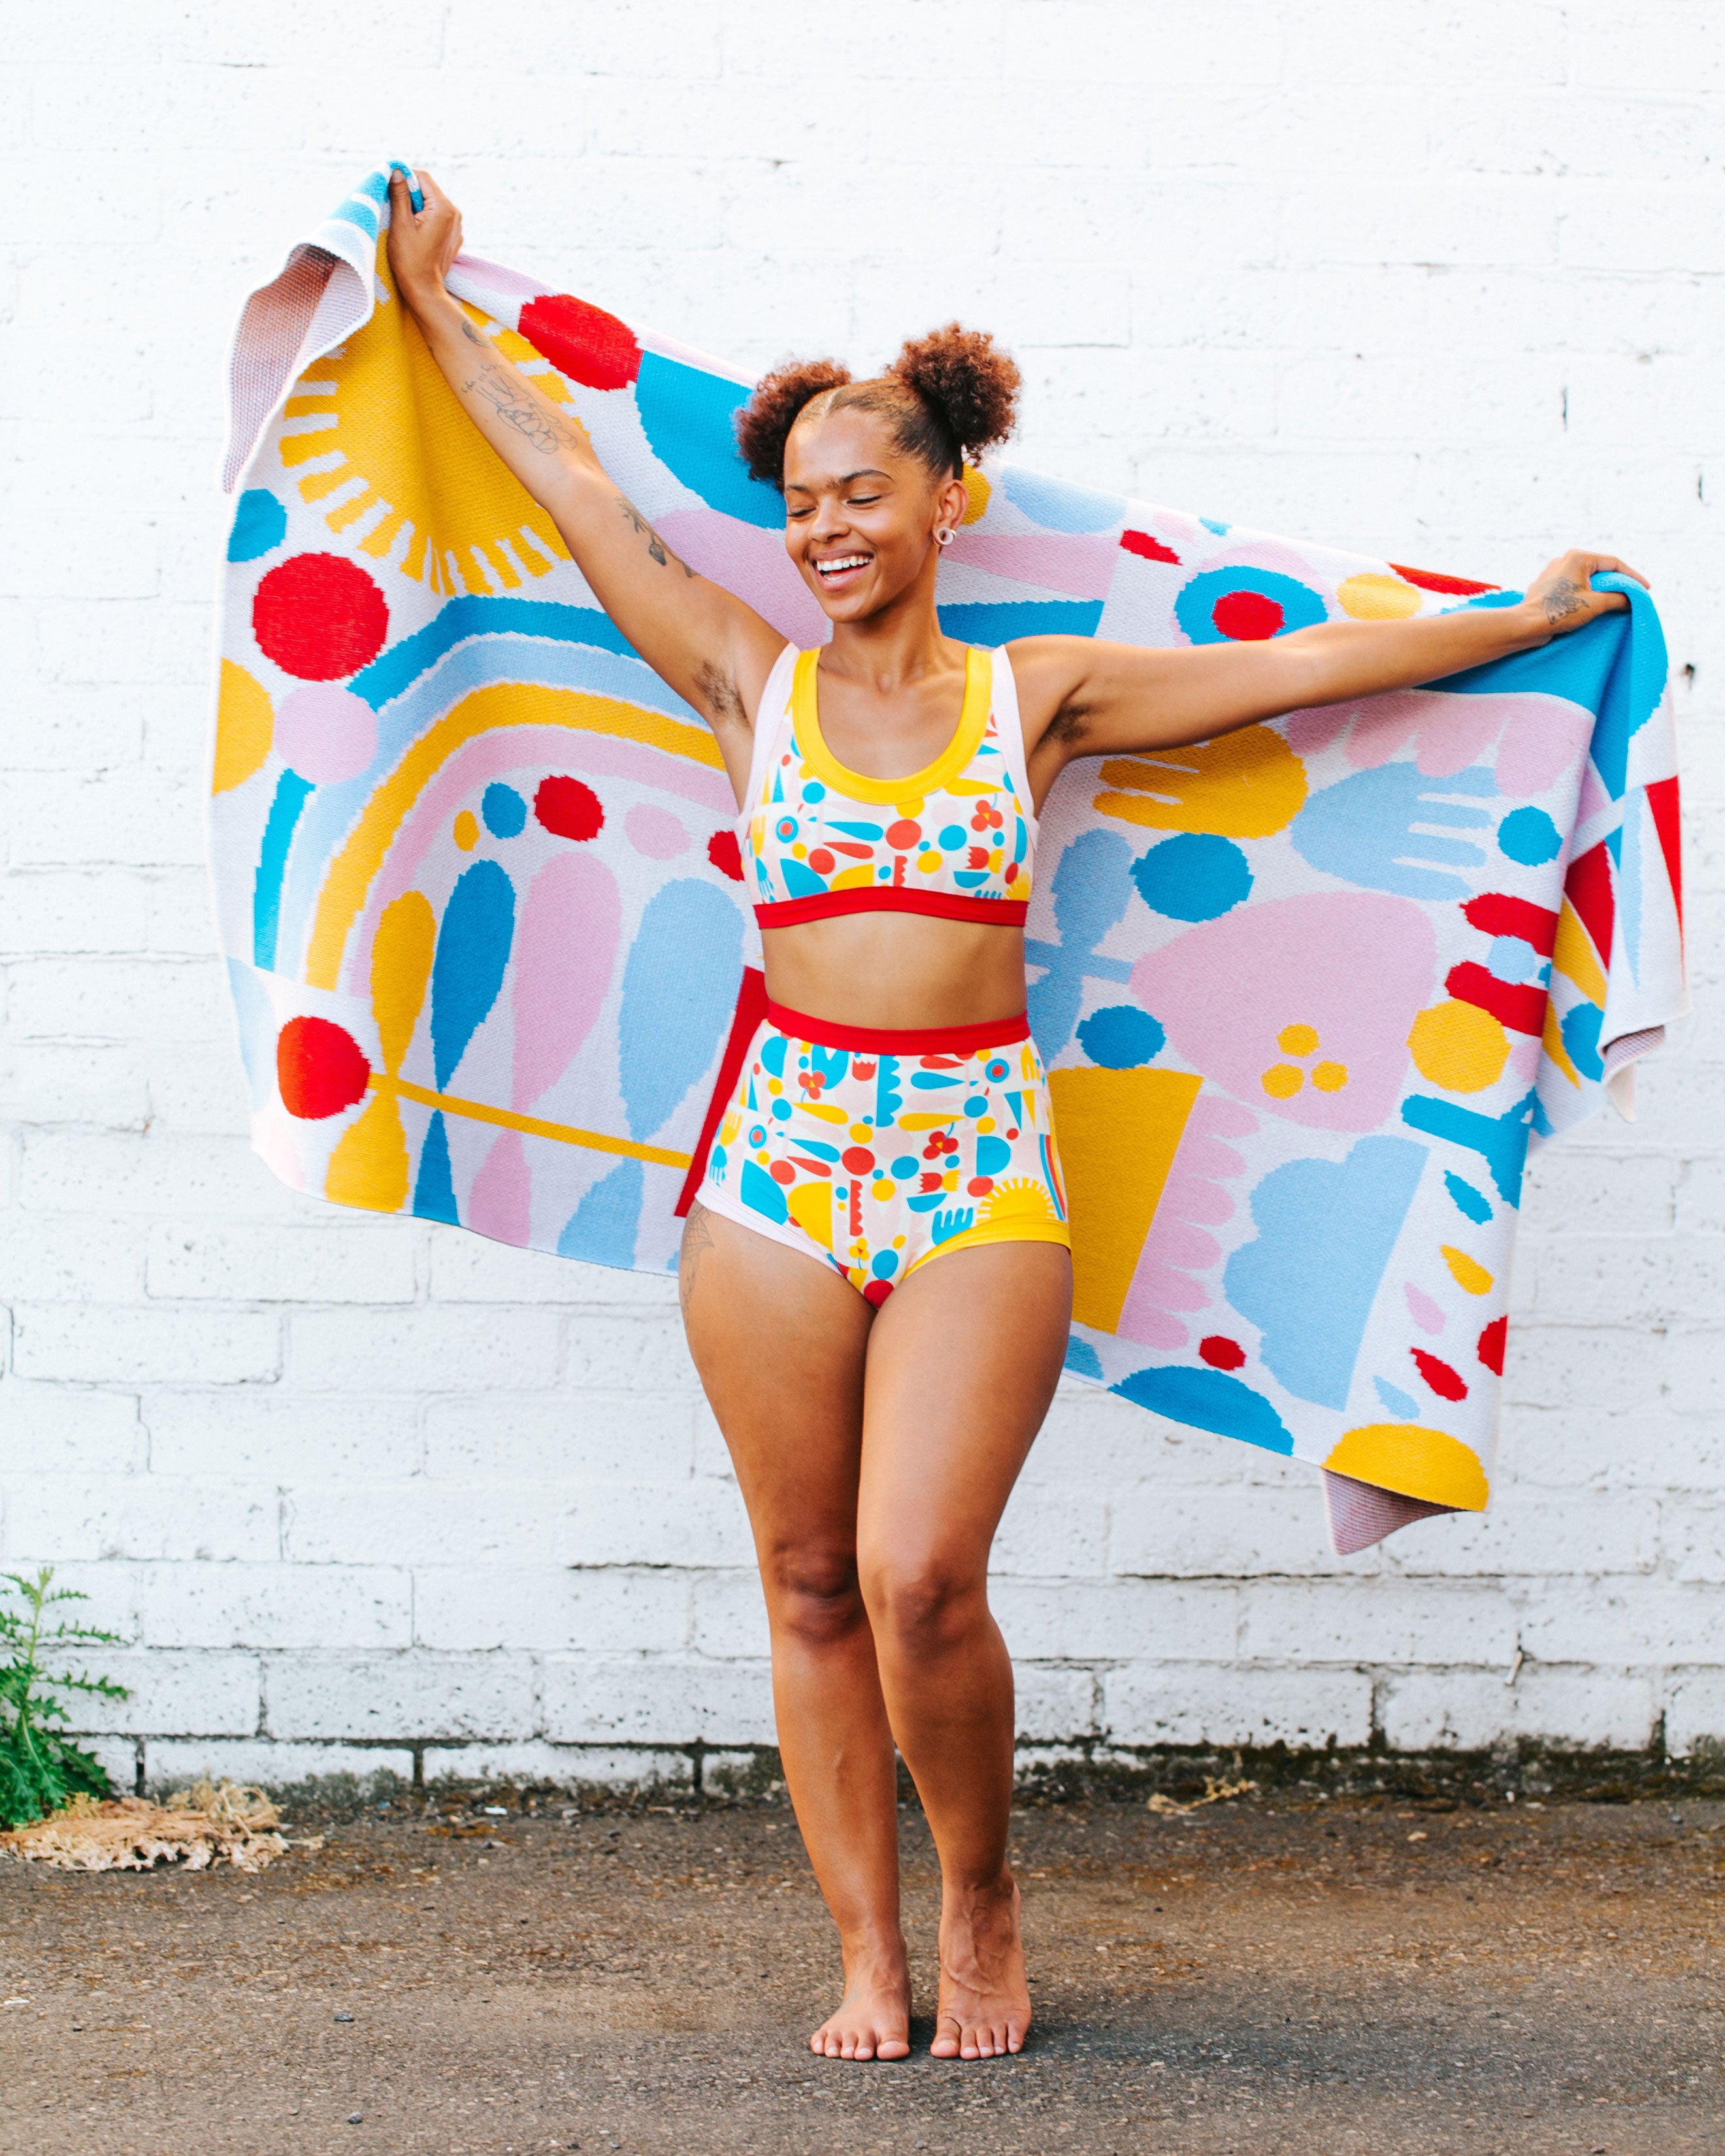 Model smiling while holding a blanket wearing a set of Sky Rise style underwear and Bralette in Balance by Lisa Congdon print: geometric shapes in pink, red, blue, and yellow colors.